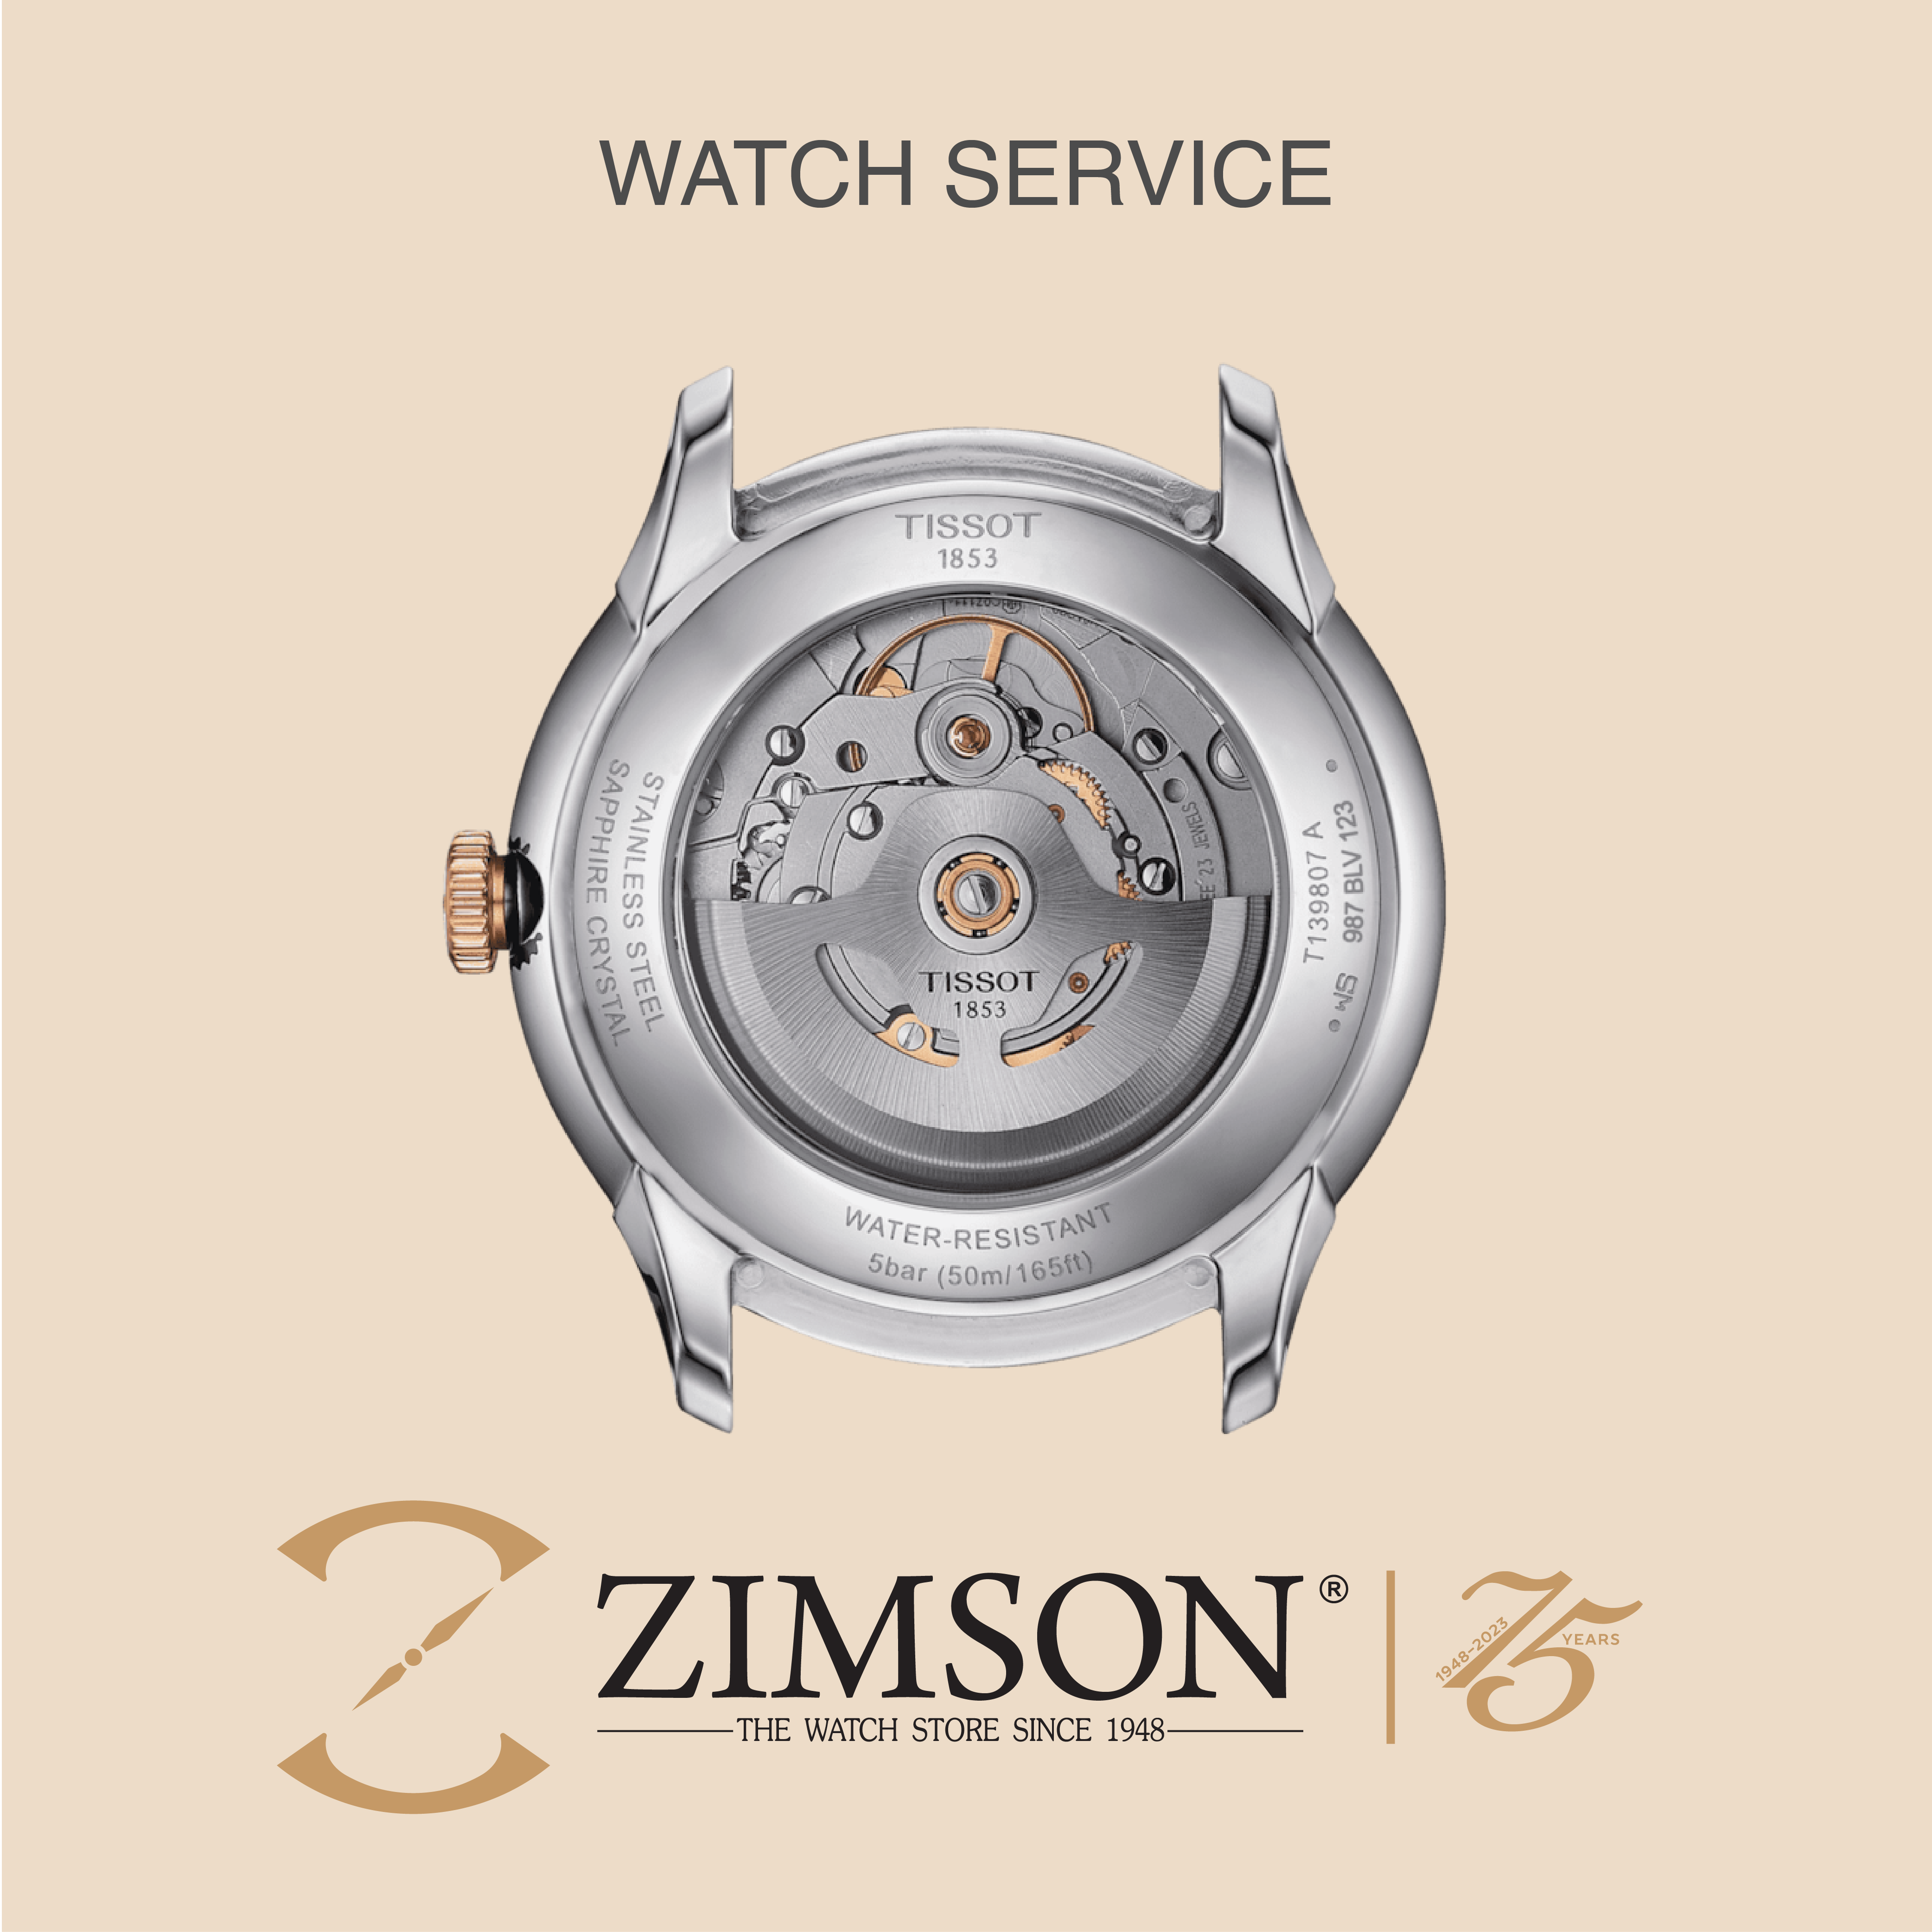 RADO 01.114.0304.3.030 Watch in Coimbatore at best price by Zimson Watches  - Justdial